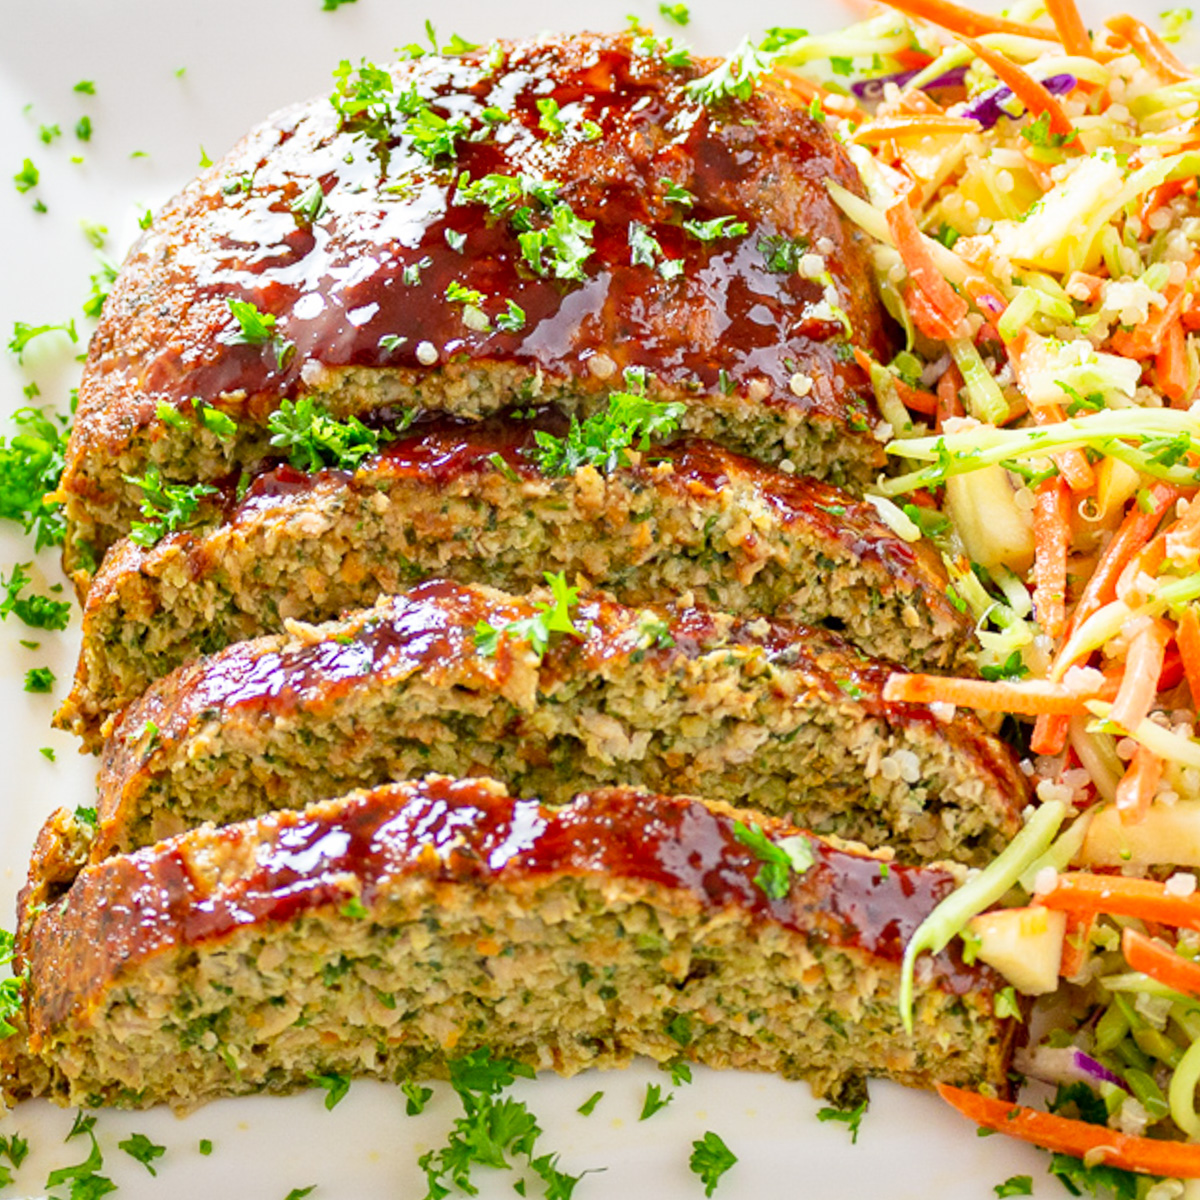 Chicken Meatloaf Recipe With Vegetables